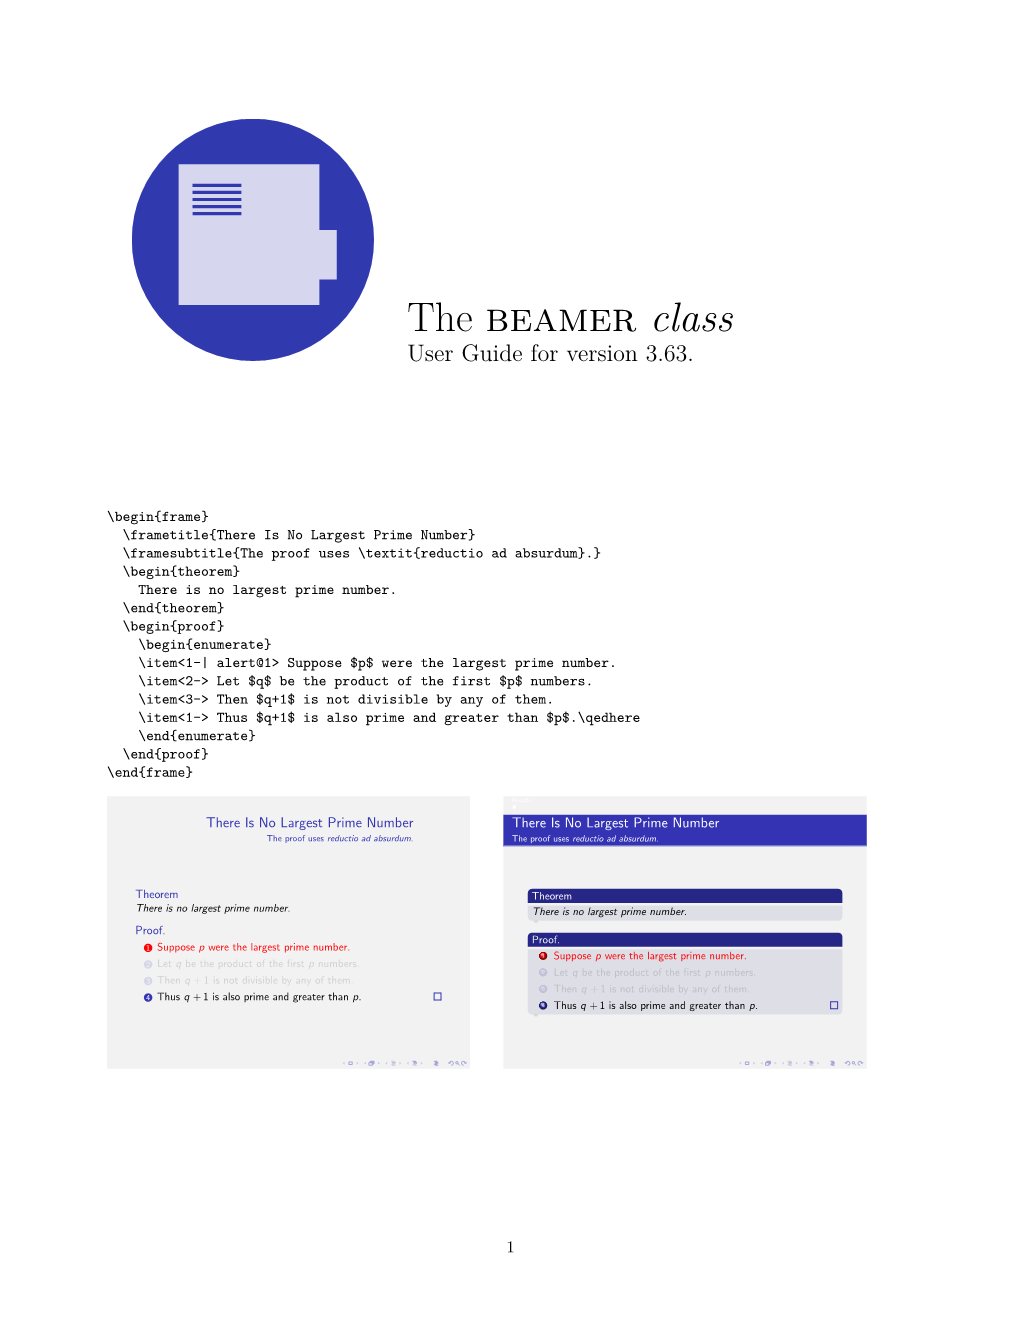 User's Guide for the Beamer Latex Class